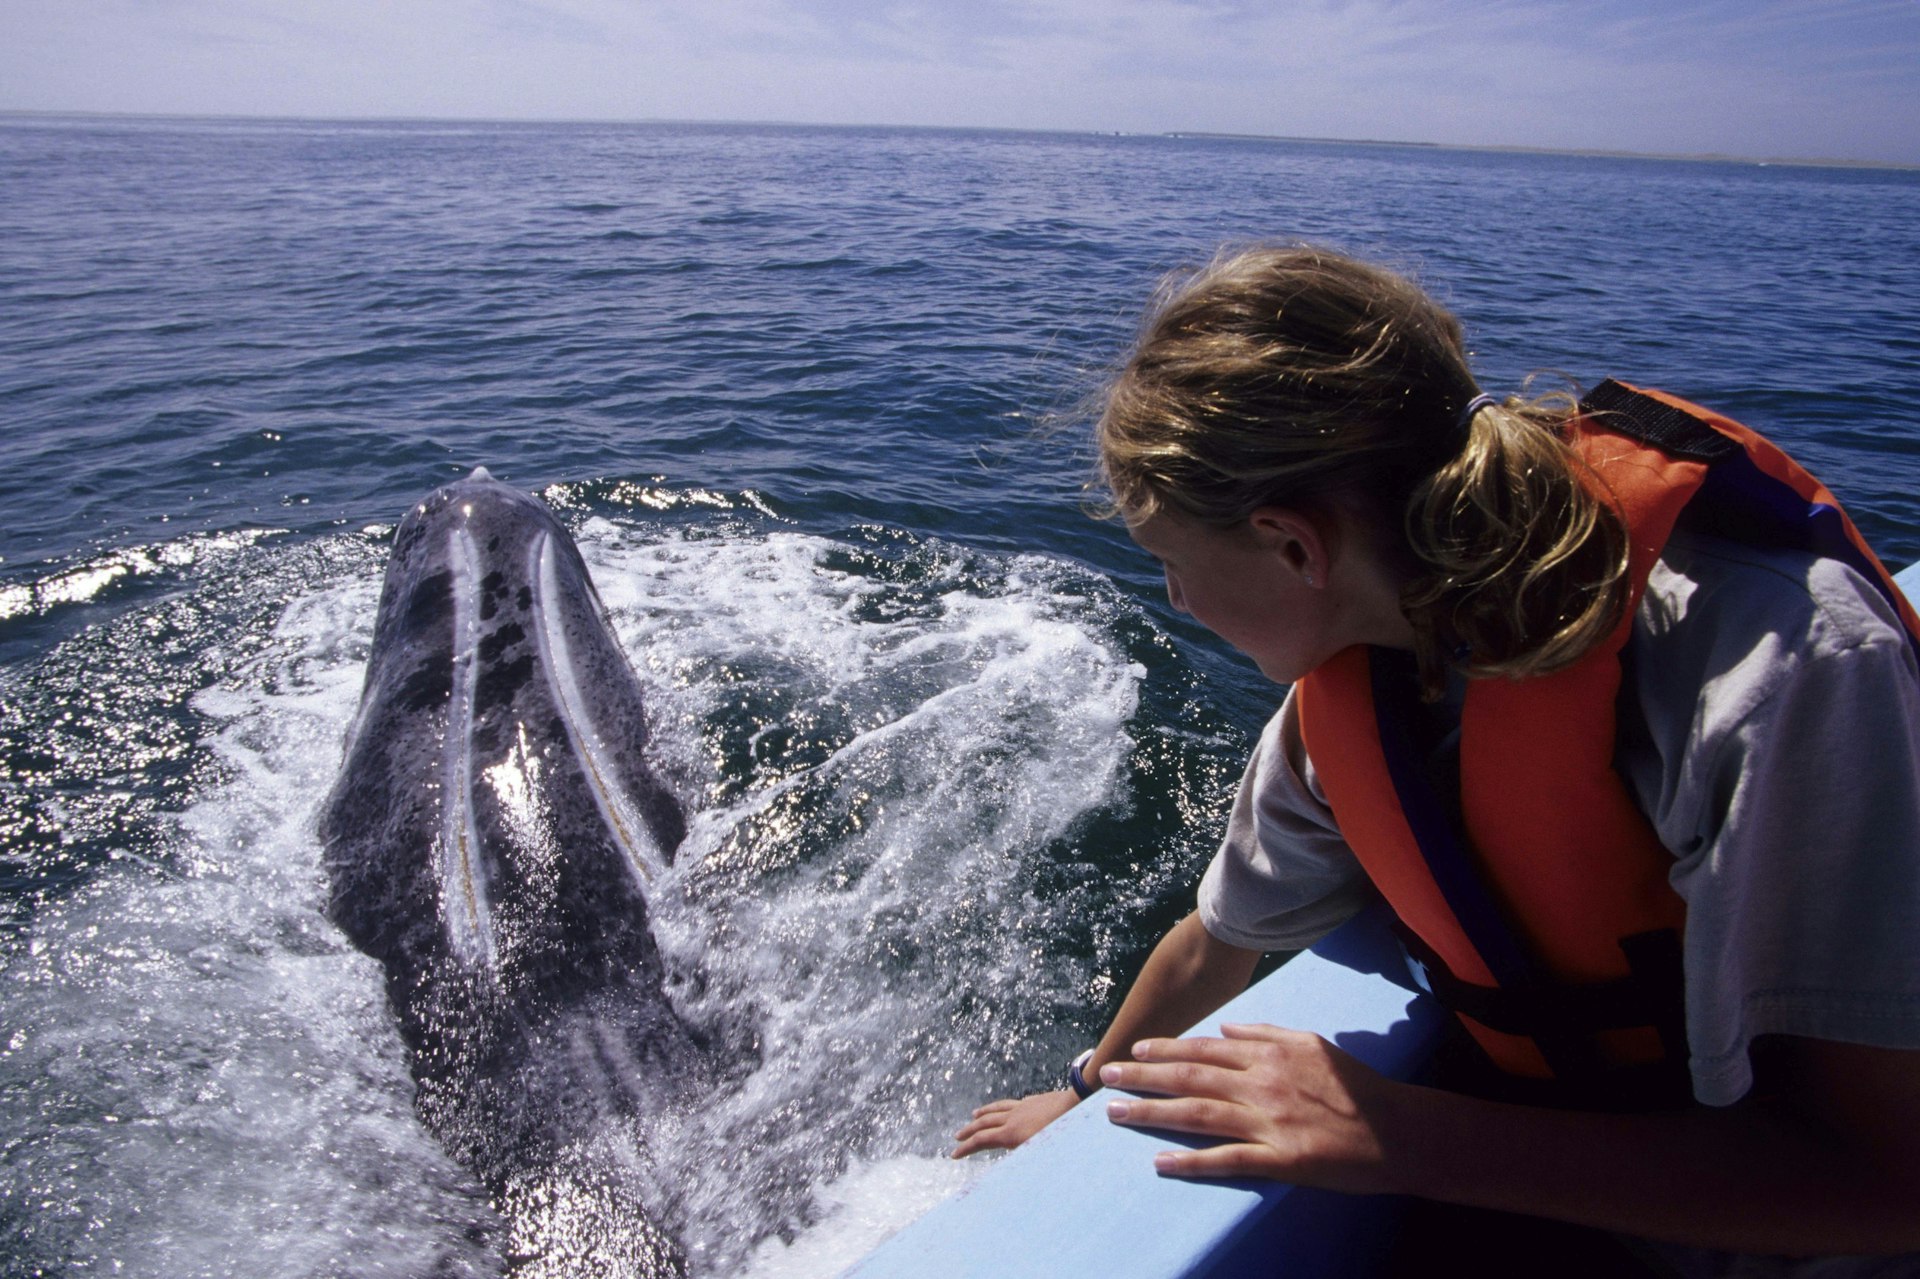 A young girl on a boat watches a gray whale surface © Wolfgang Kaehler / Getty Images